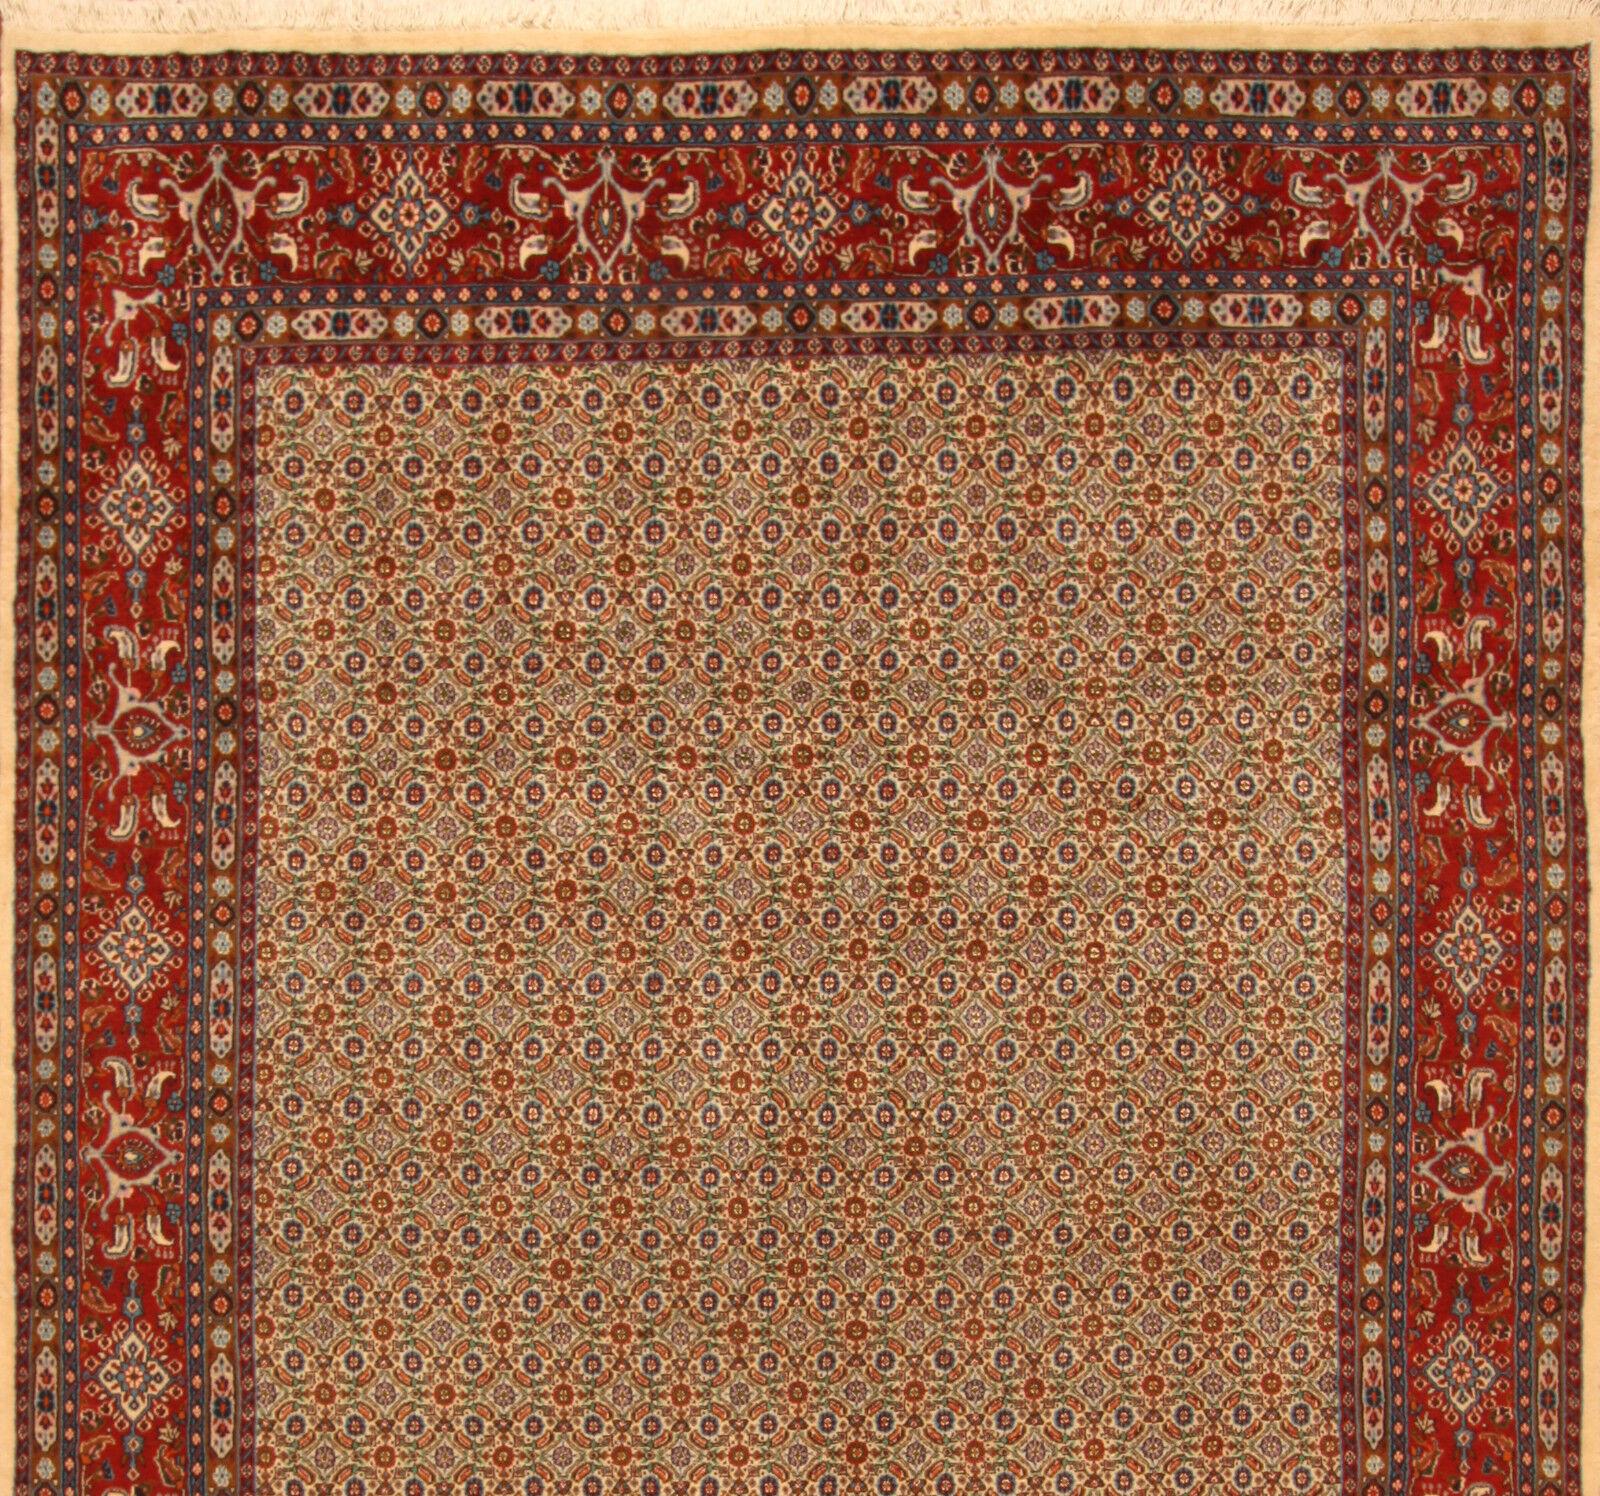 Handmade Vintage Indian Mahal Rug 6.3' x 9.8', 1970s - 1T30 For Sale 4